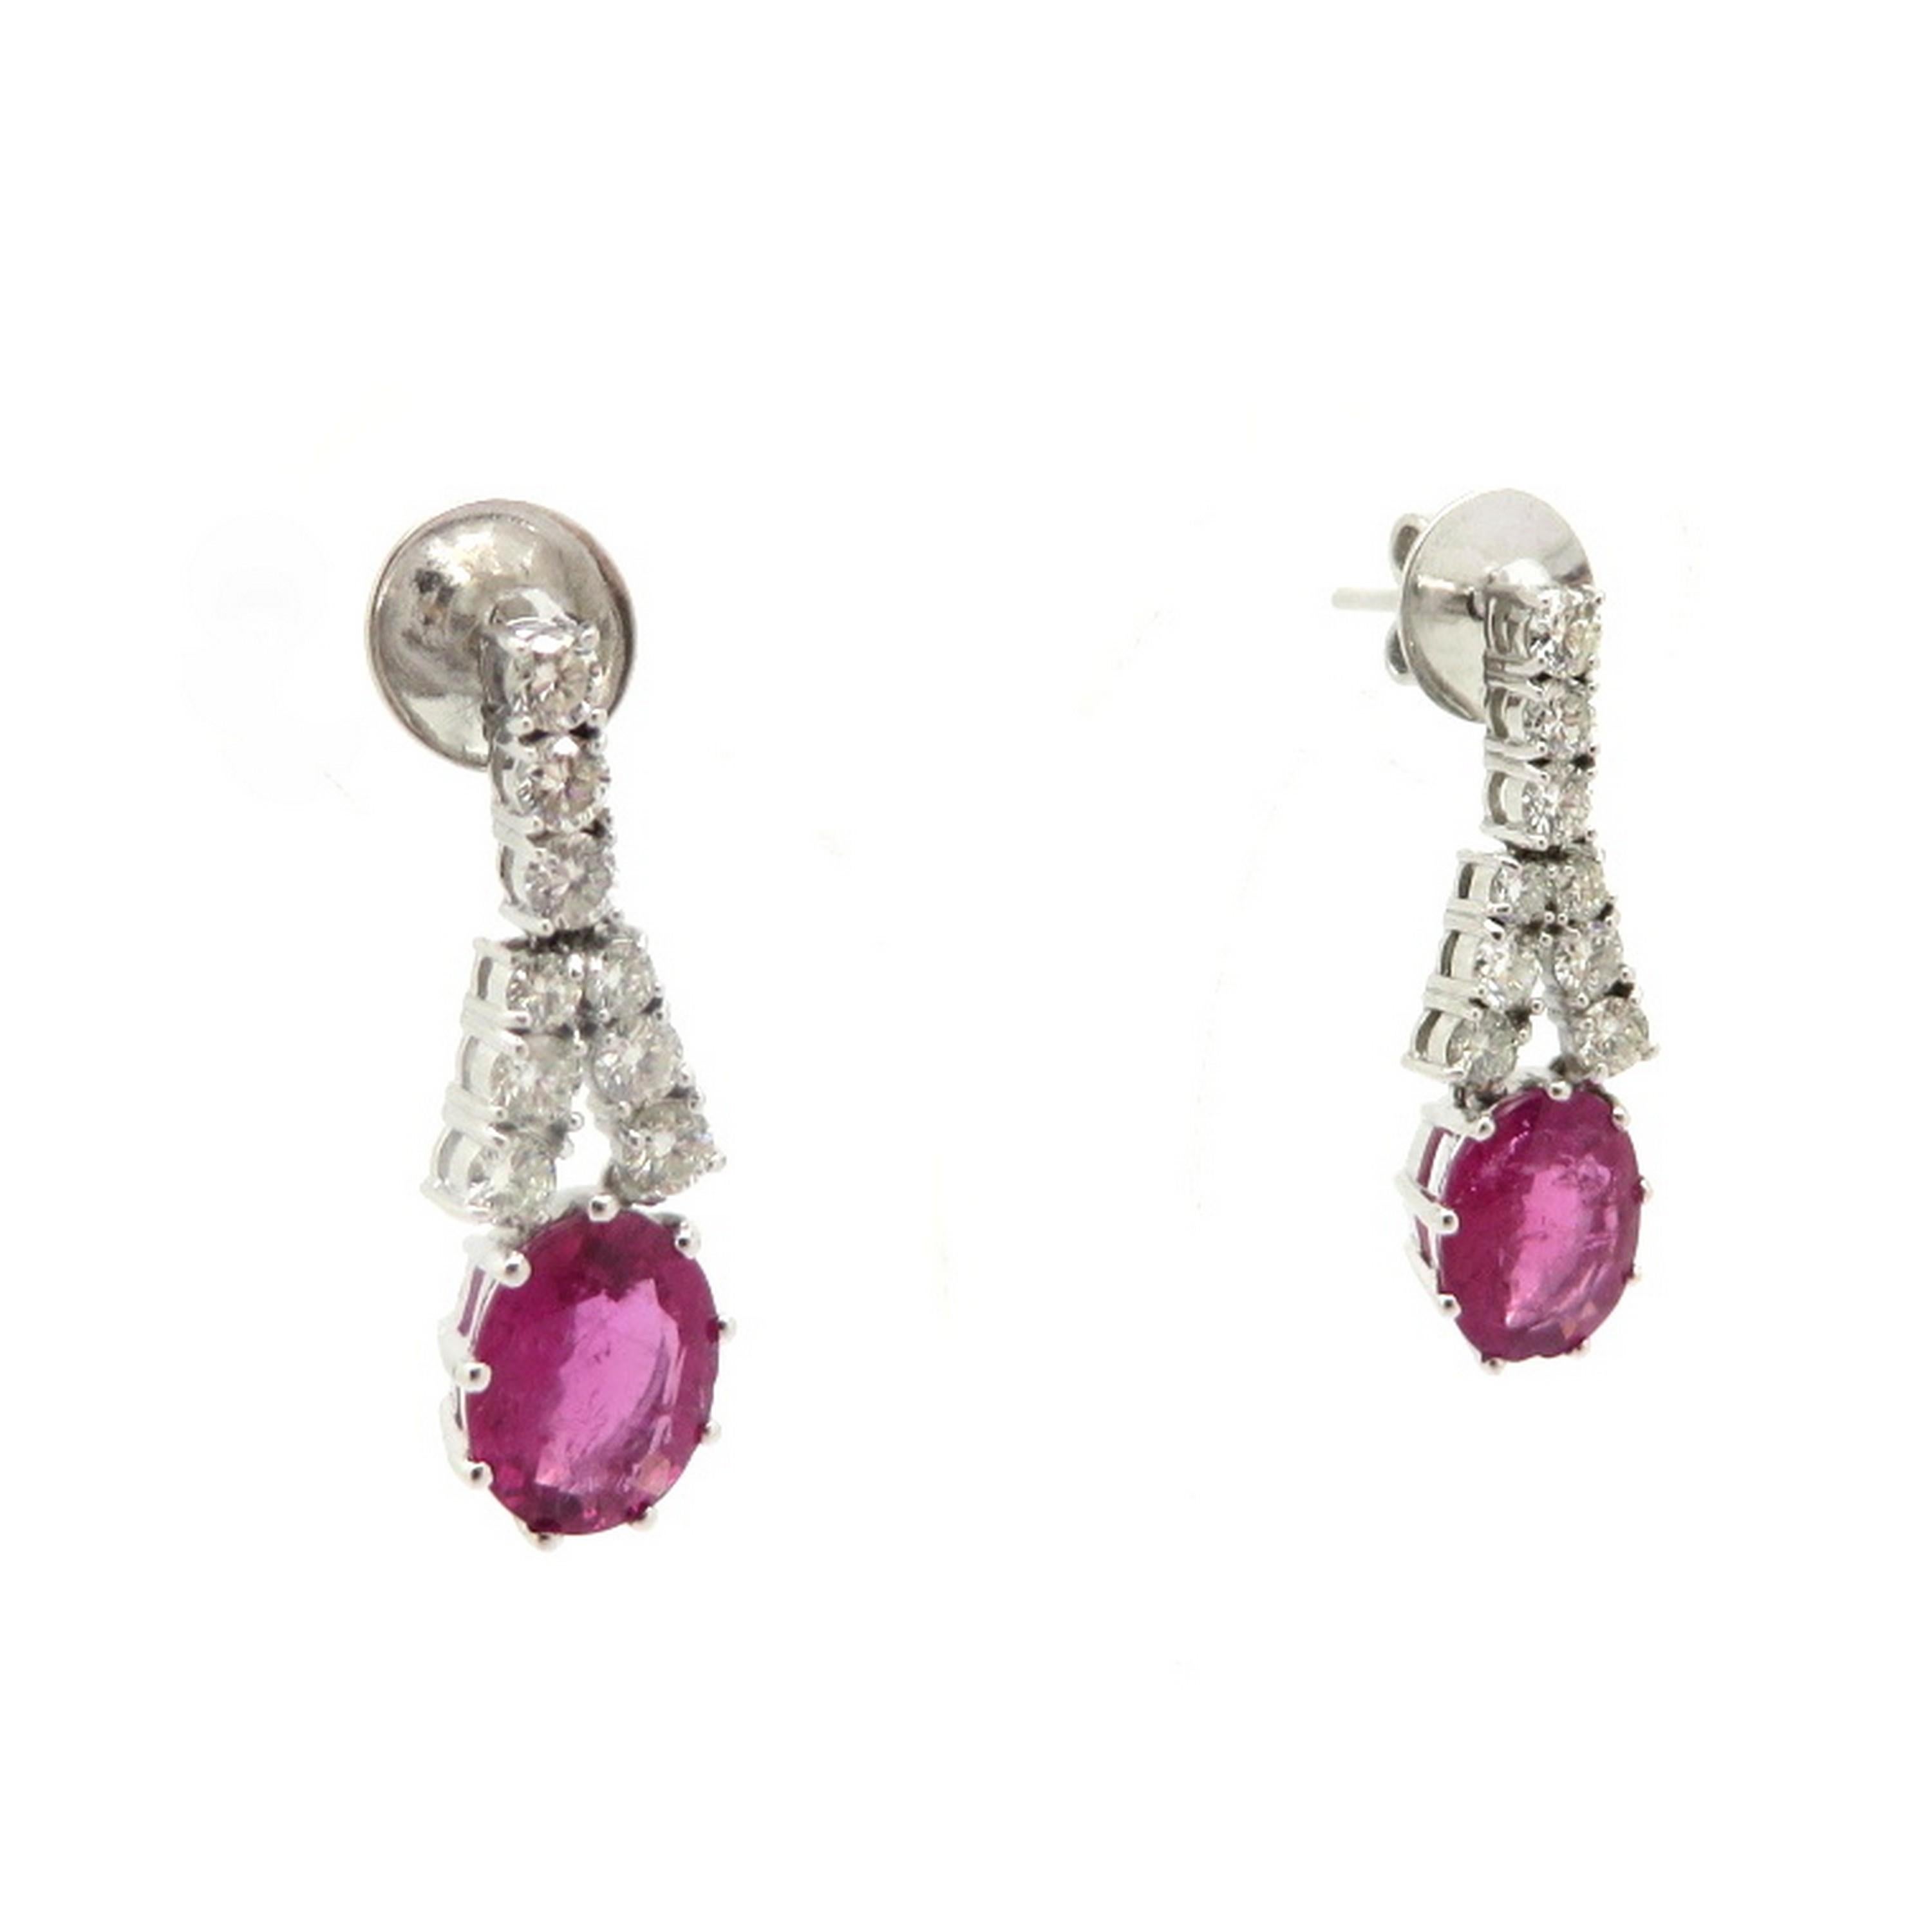 Estate 14K white gold pink tourmaline and round diamond dangle earrings. Showcasing two fine quality oval brilliant cut pink tourmaline gemstones, each nine prong set, weighing a combined total of approximately 3.36 carats. Accented with 18 round